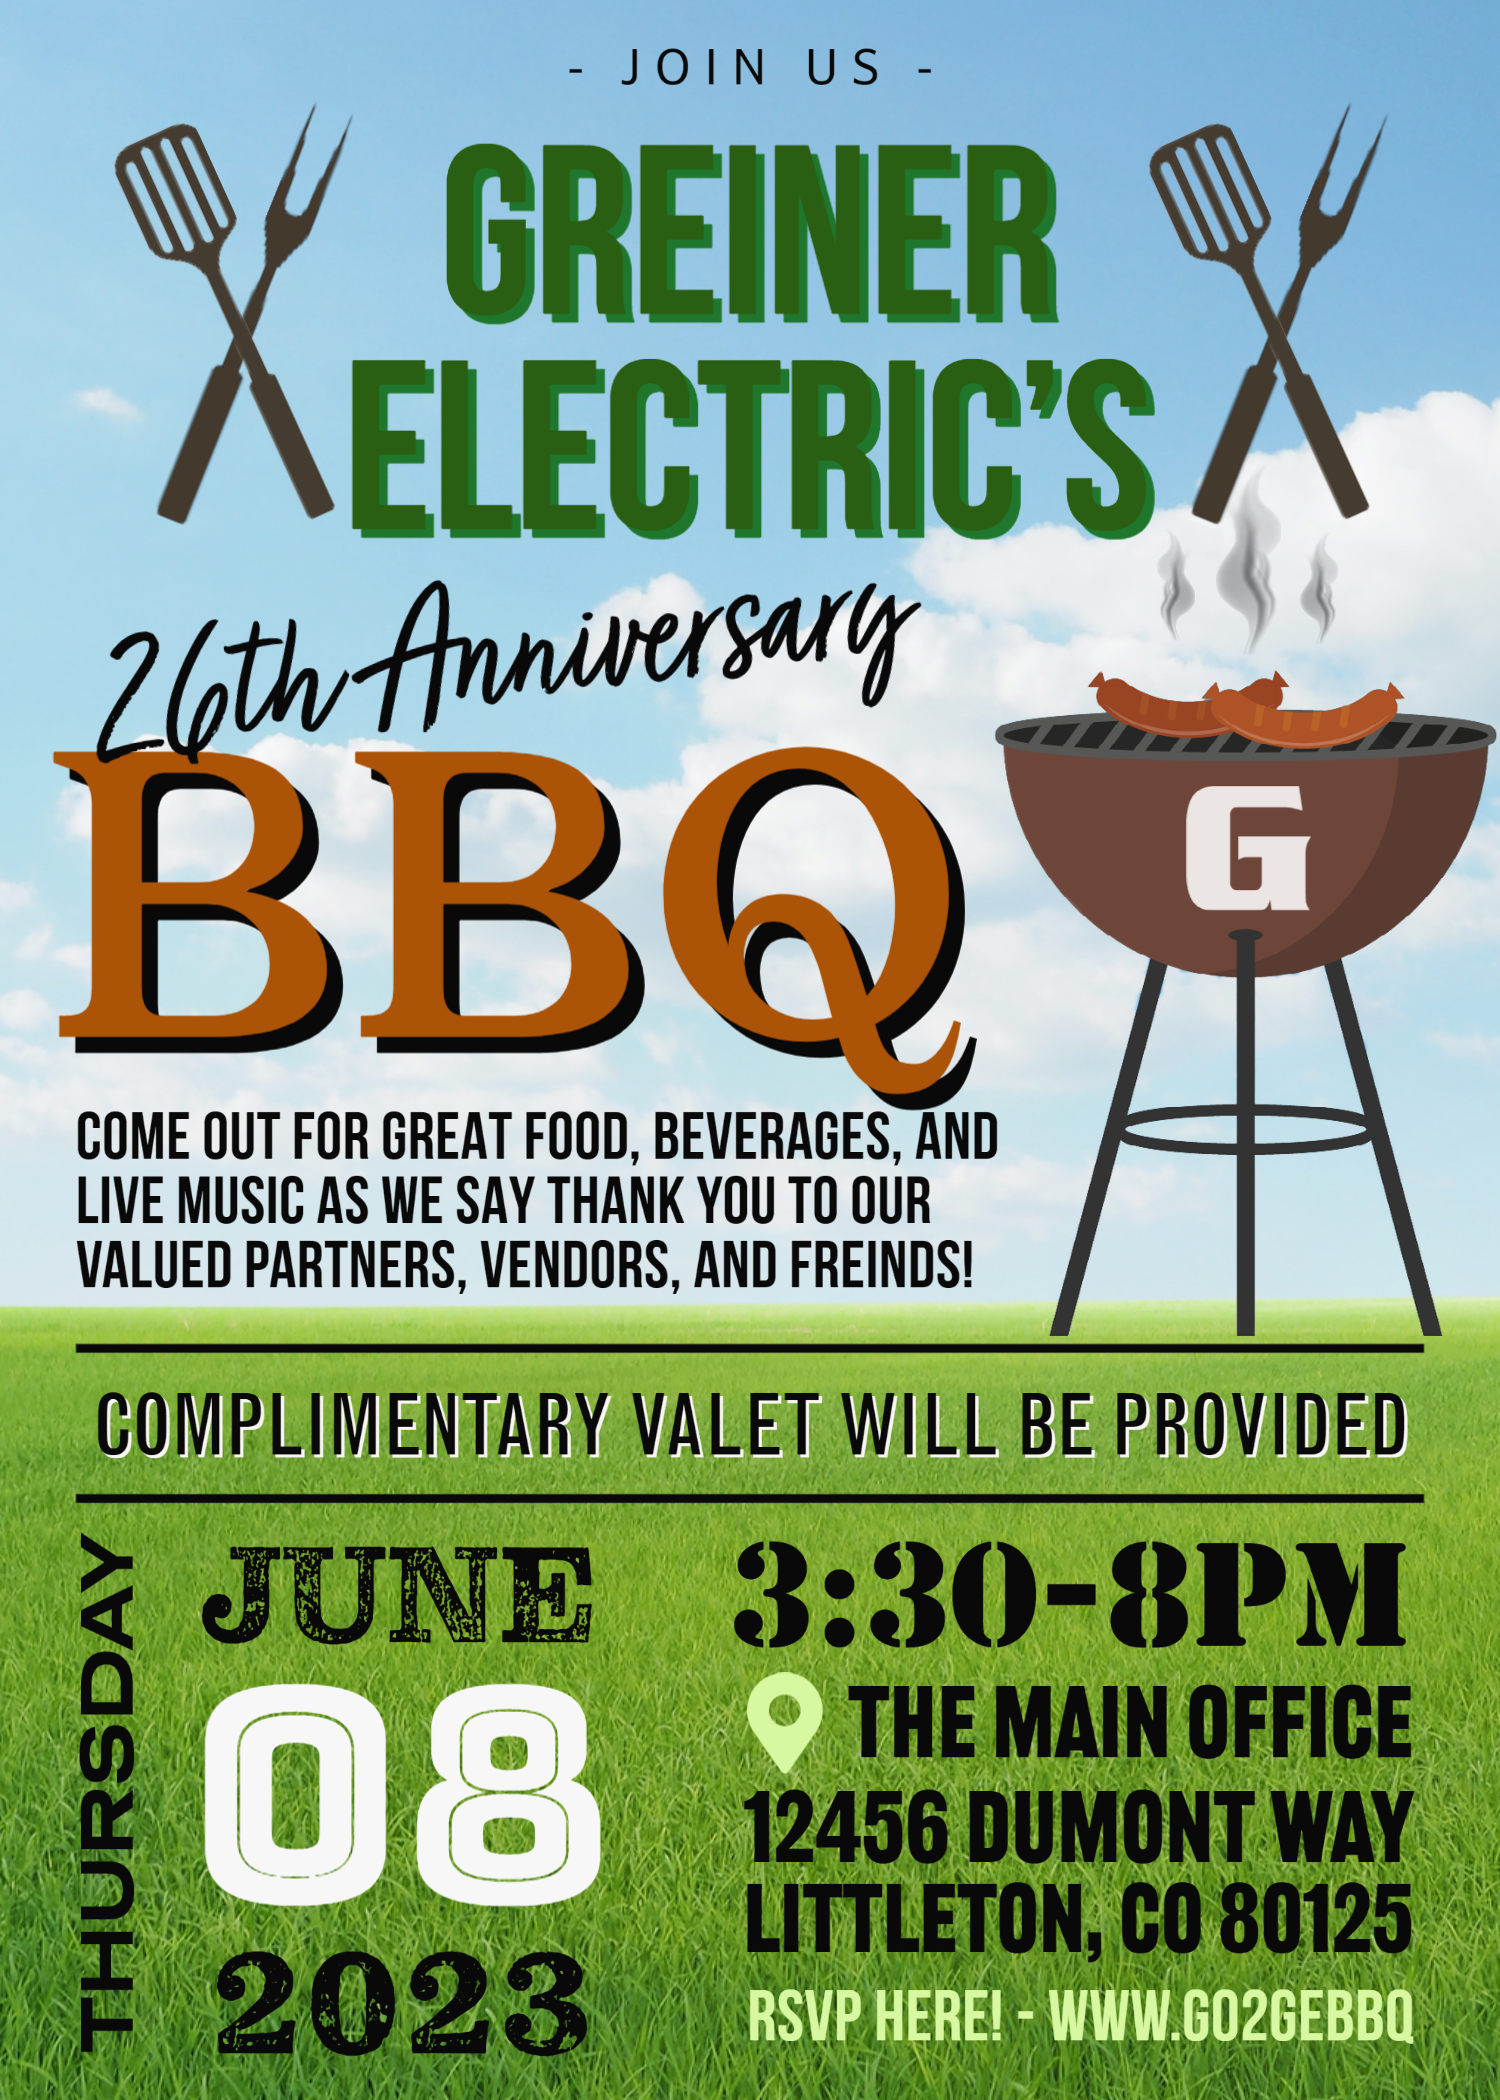 
Greiner Electric's 26th Anniversary Barbecue